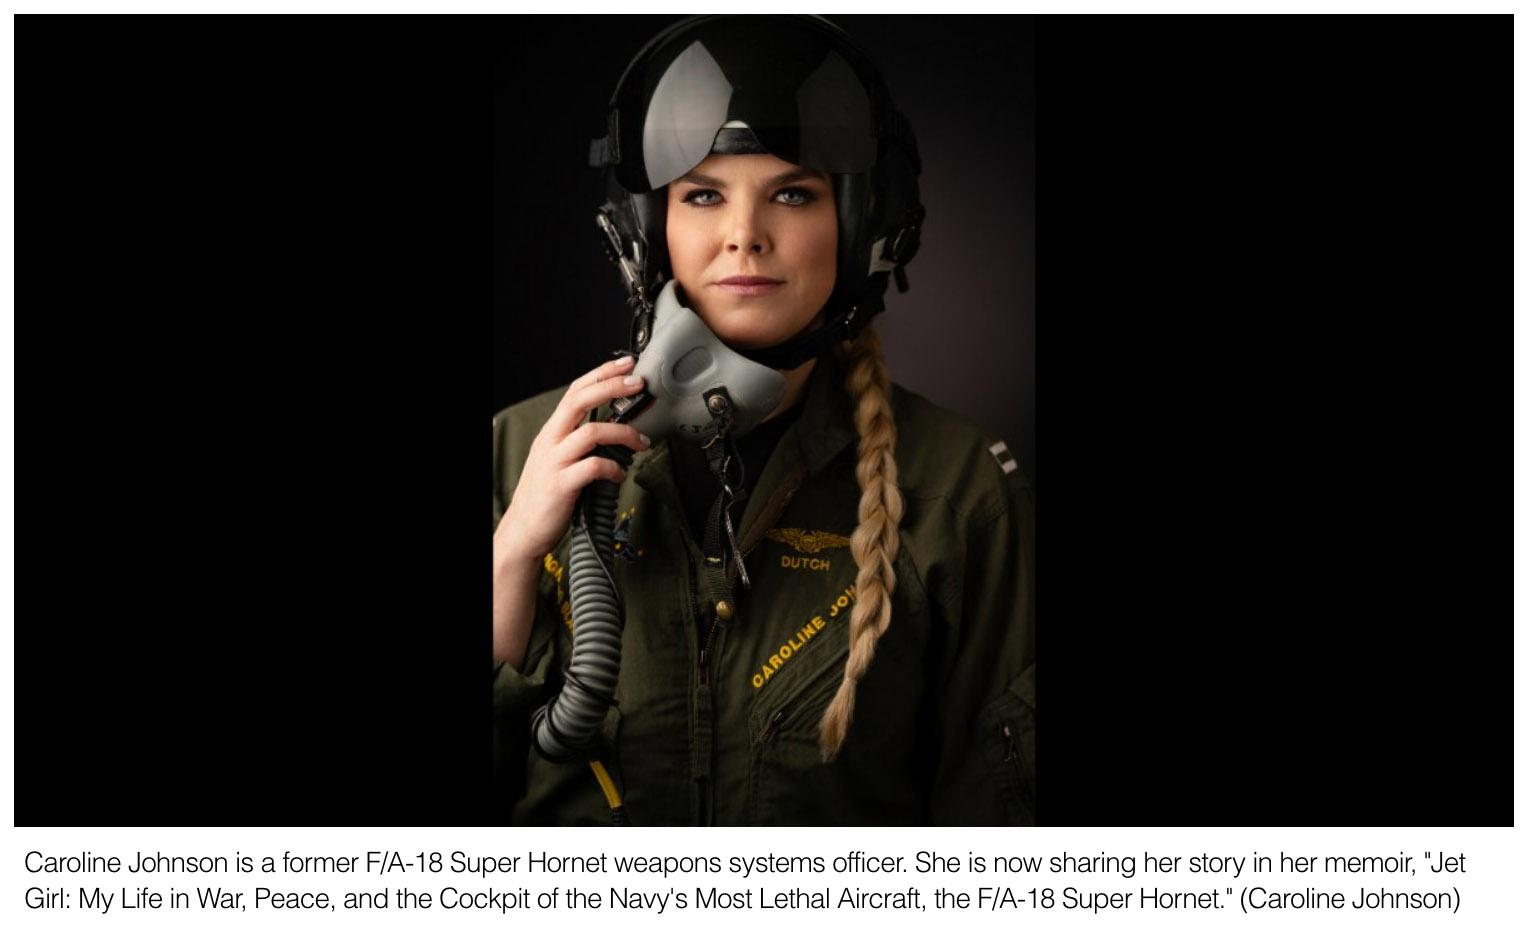  Jet Girls story fighting ISIS in the cockpit of an FA-18 Super Hornet